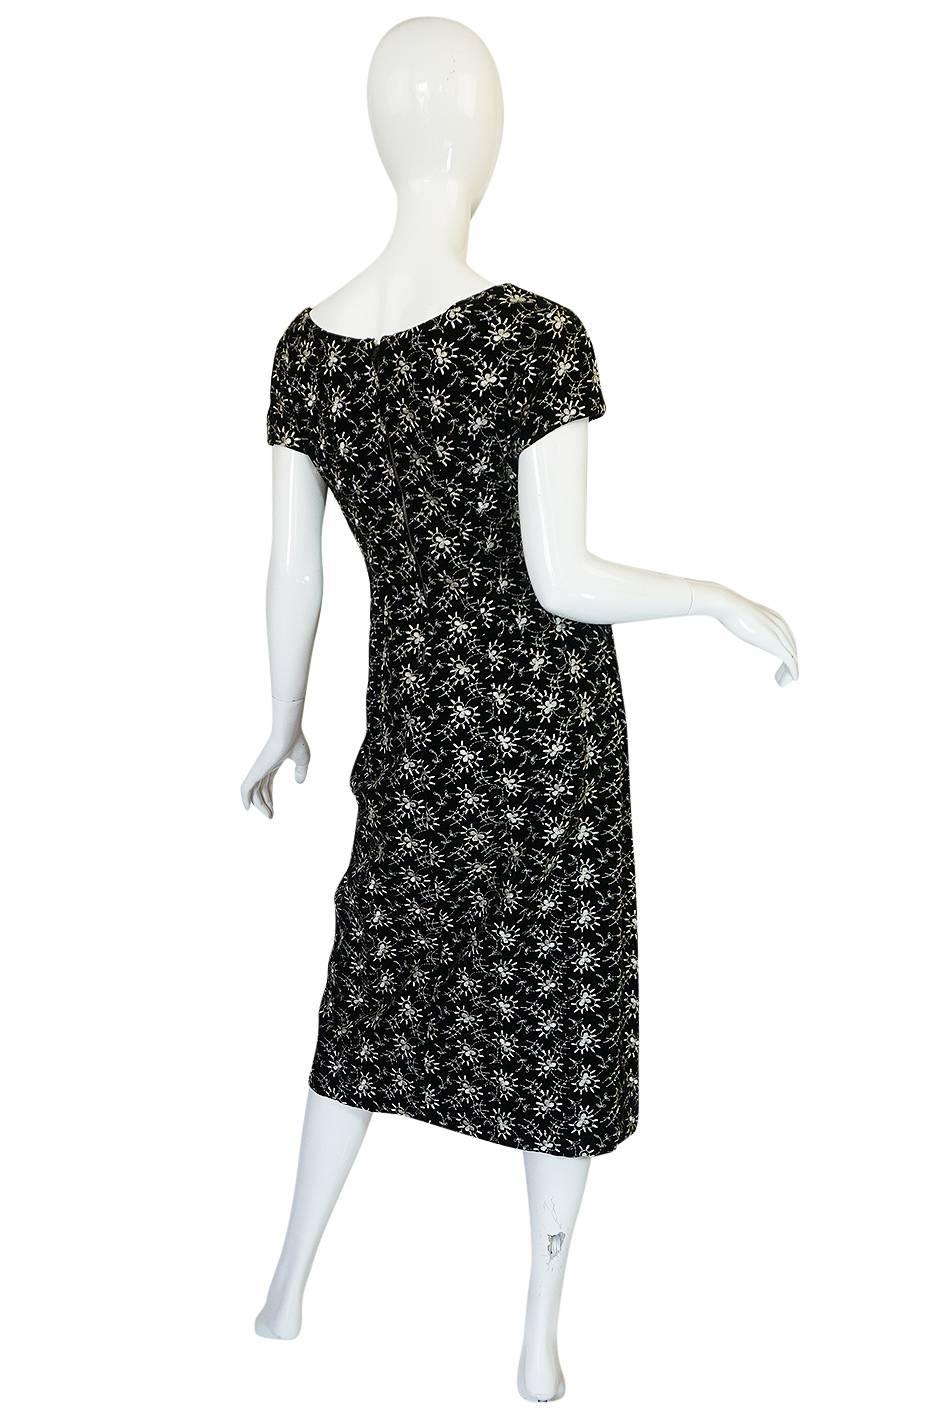 This is really an amazing and strong styled late forties dress that I just love. It is made of a black cotton velvet so has mote of a matte feel and flatness to the pile then its silk counterparts. Over this it has an amazing hand embroidered design